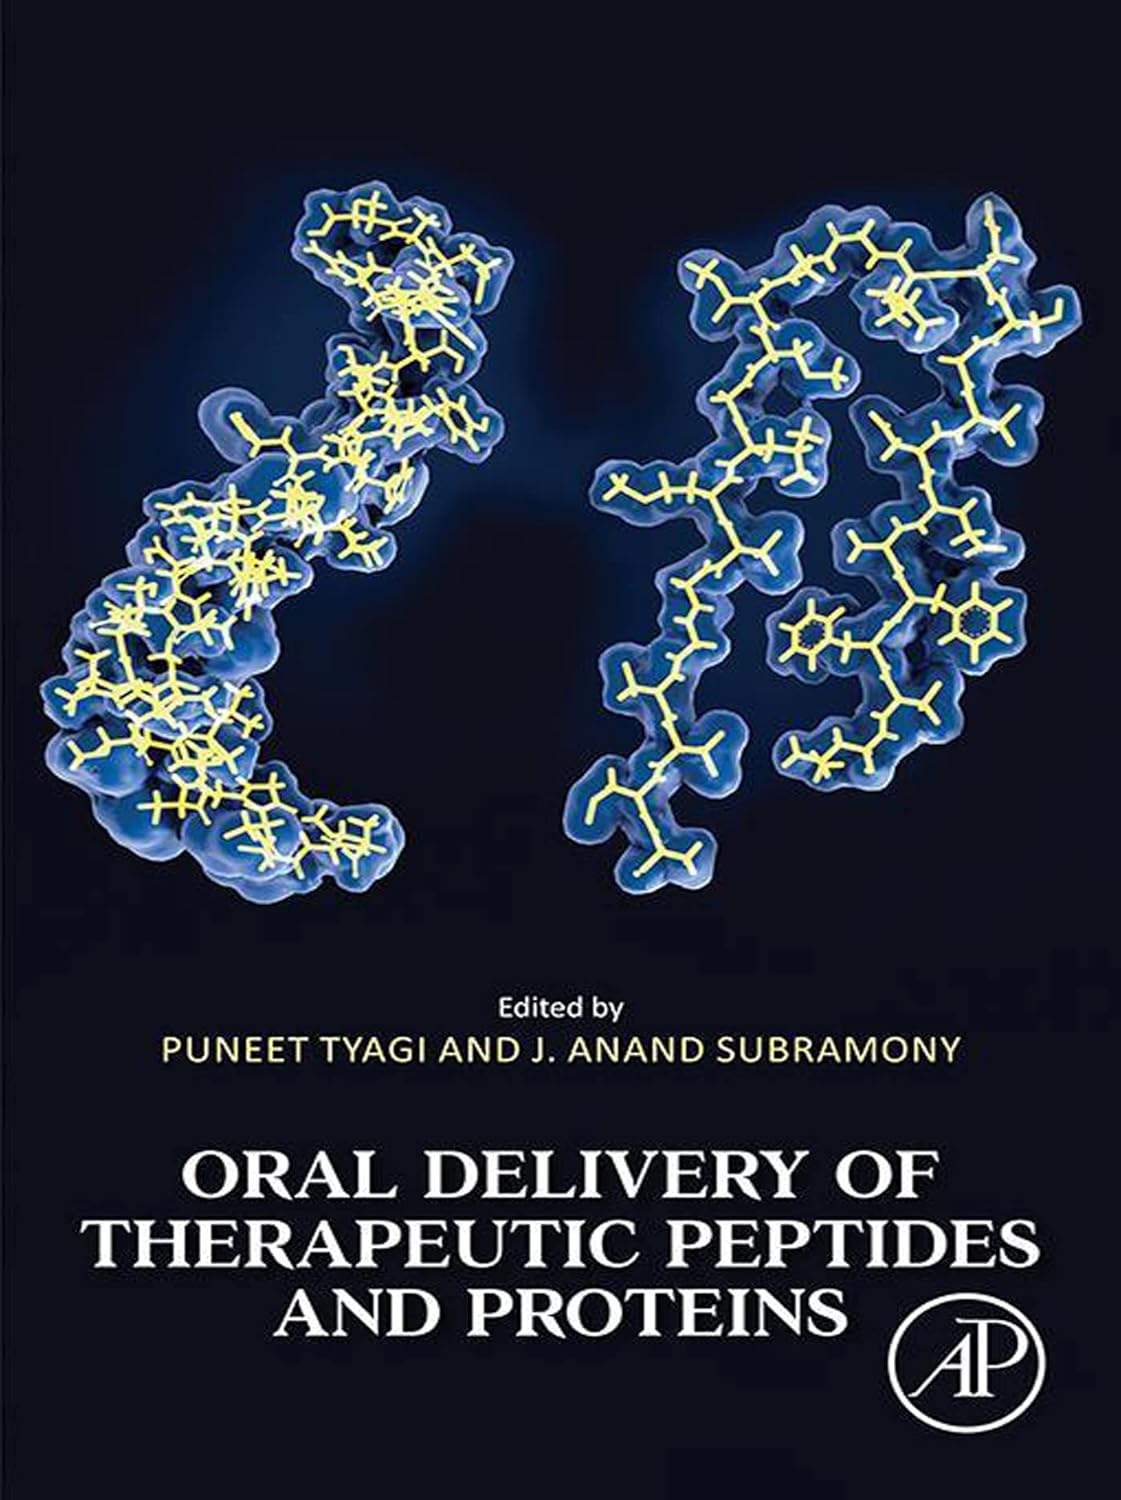 Oral Delivery of Therapeutic Peptides and Proteins  by Puneet Tyagi 